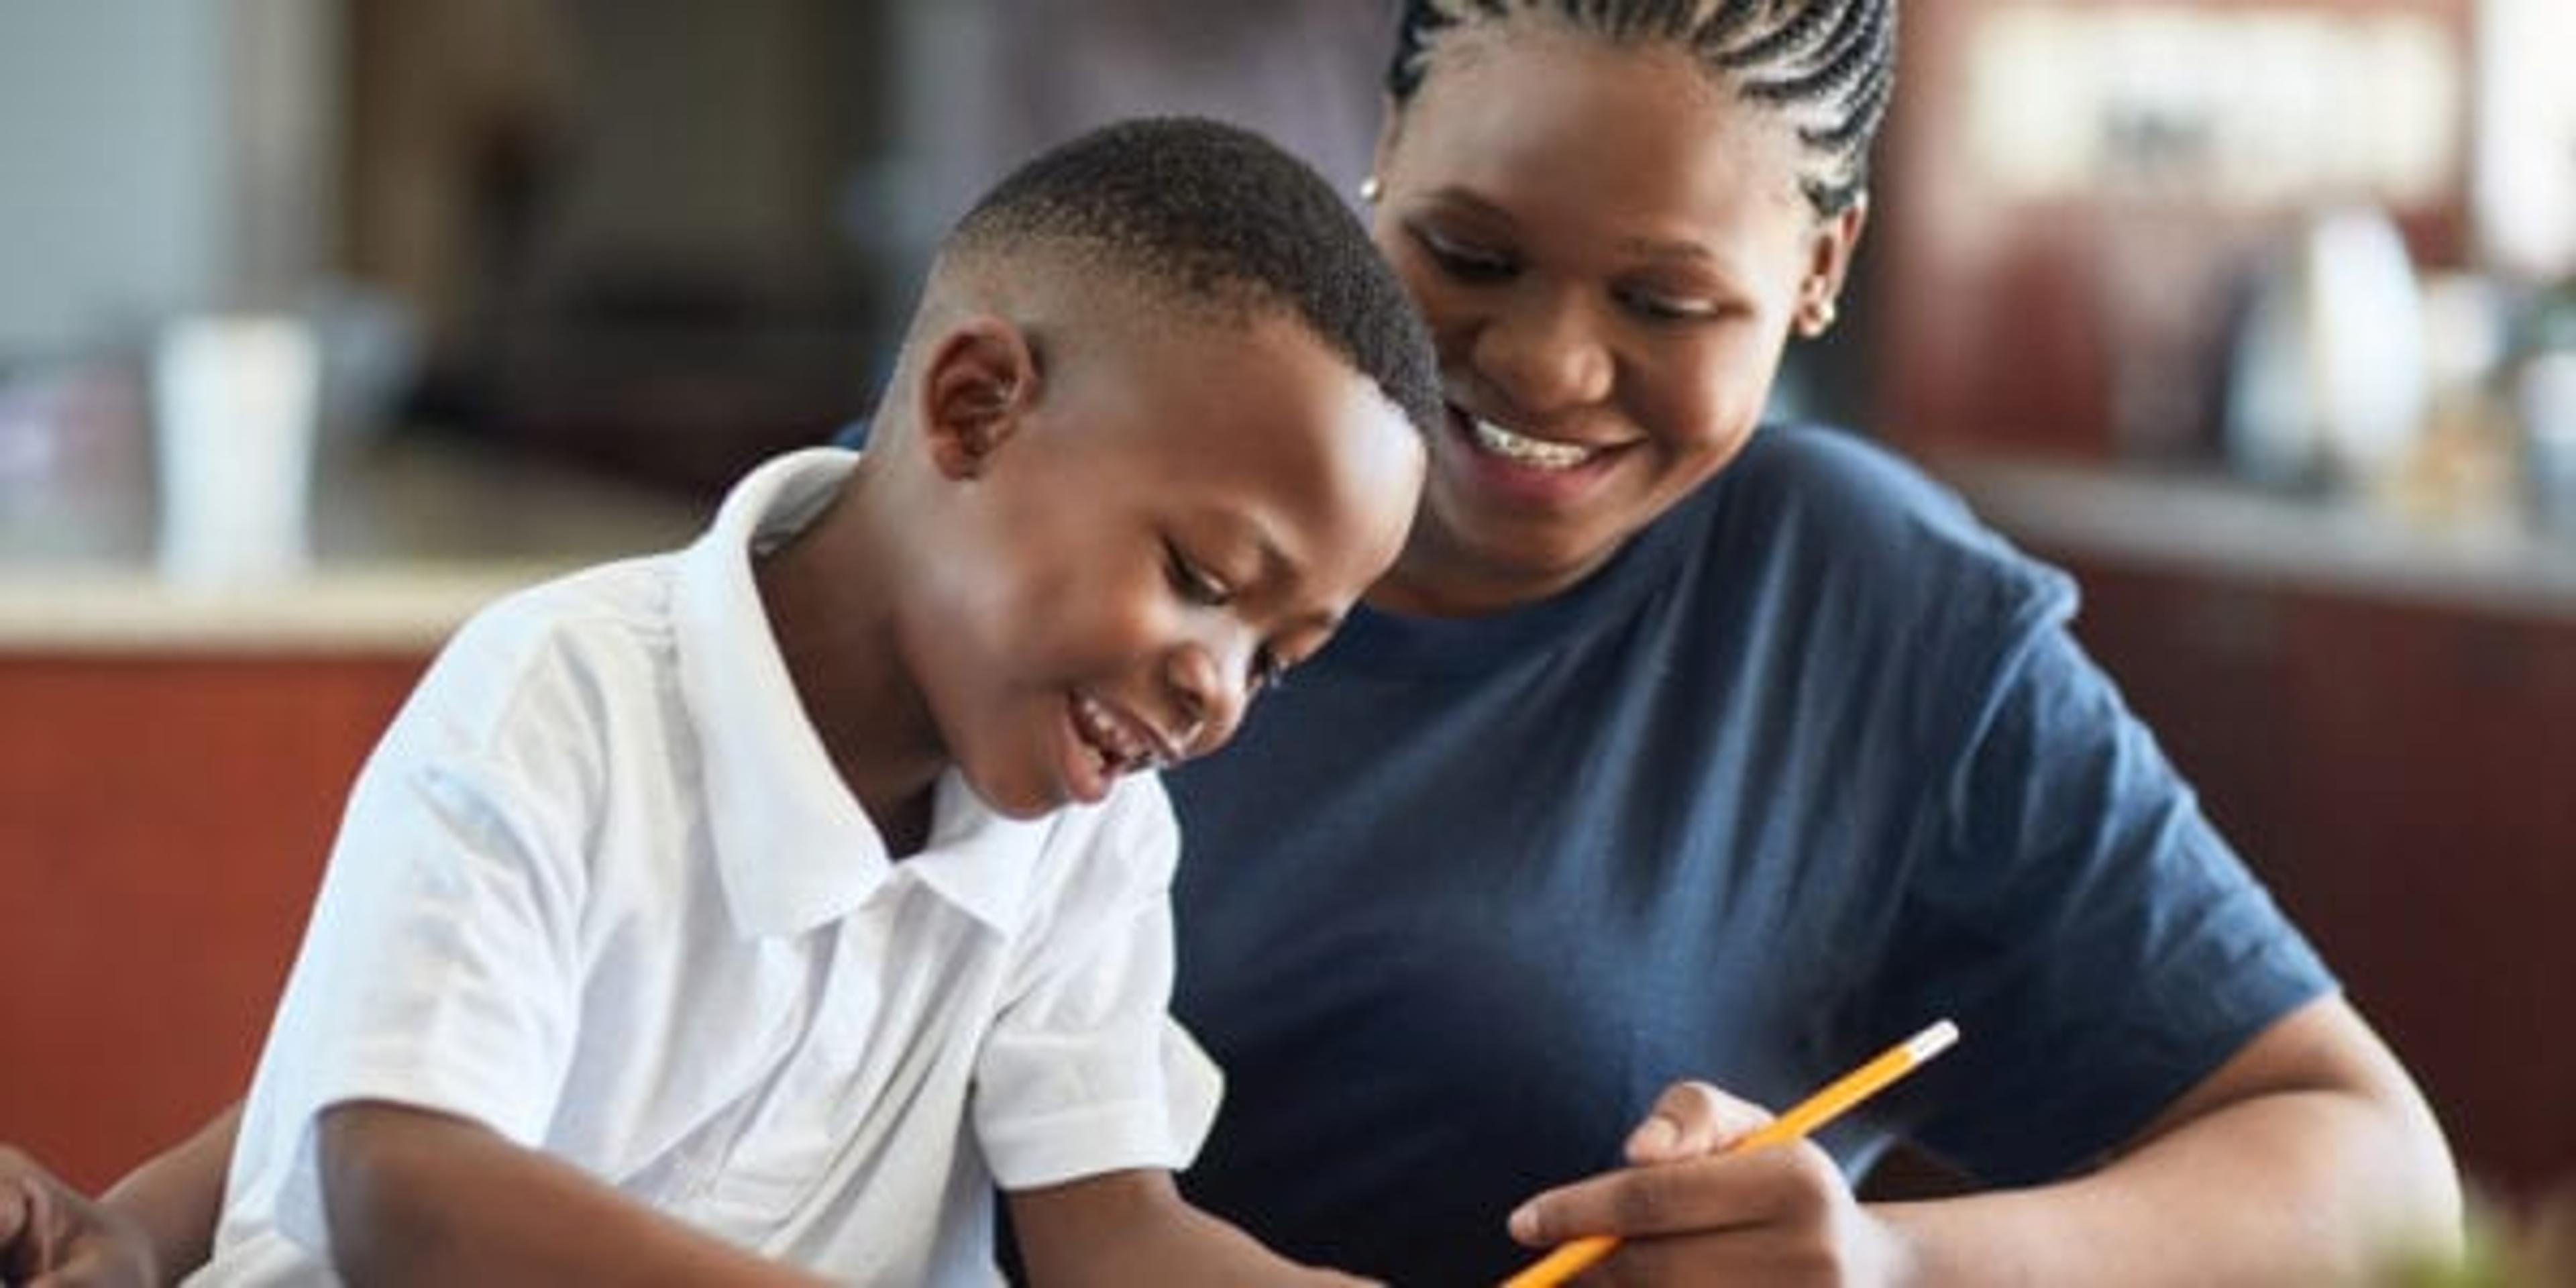 A Black mother and son sit at a desk doing schoolwork and smiling.